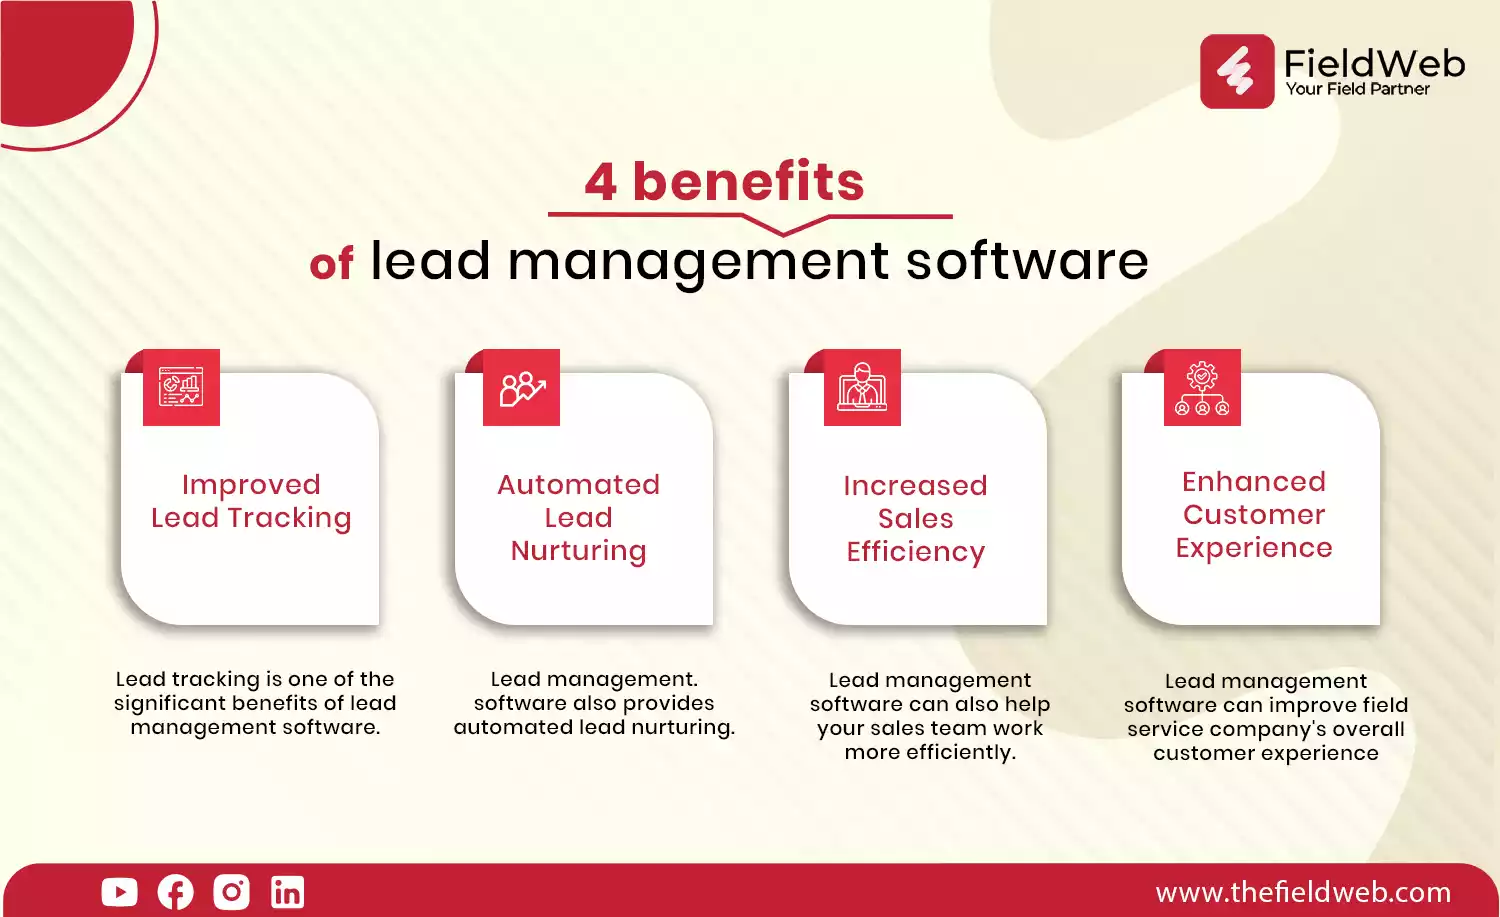 image is displaying 4  benefits of lead management software